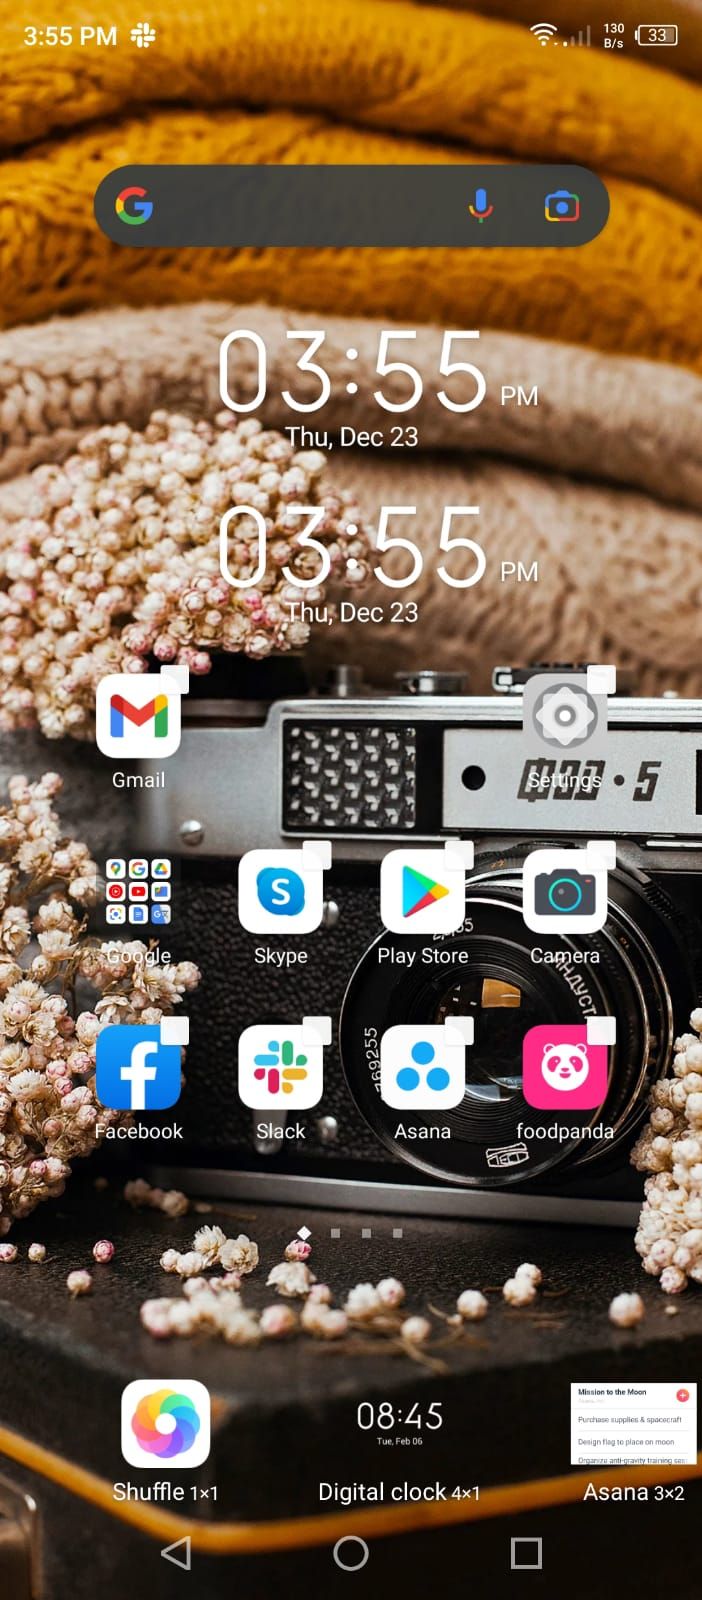 Second Clock Widget Inserted to the Home Screen